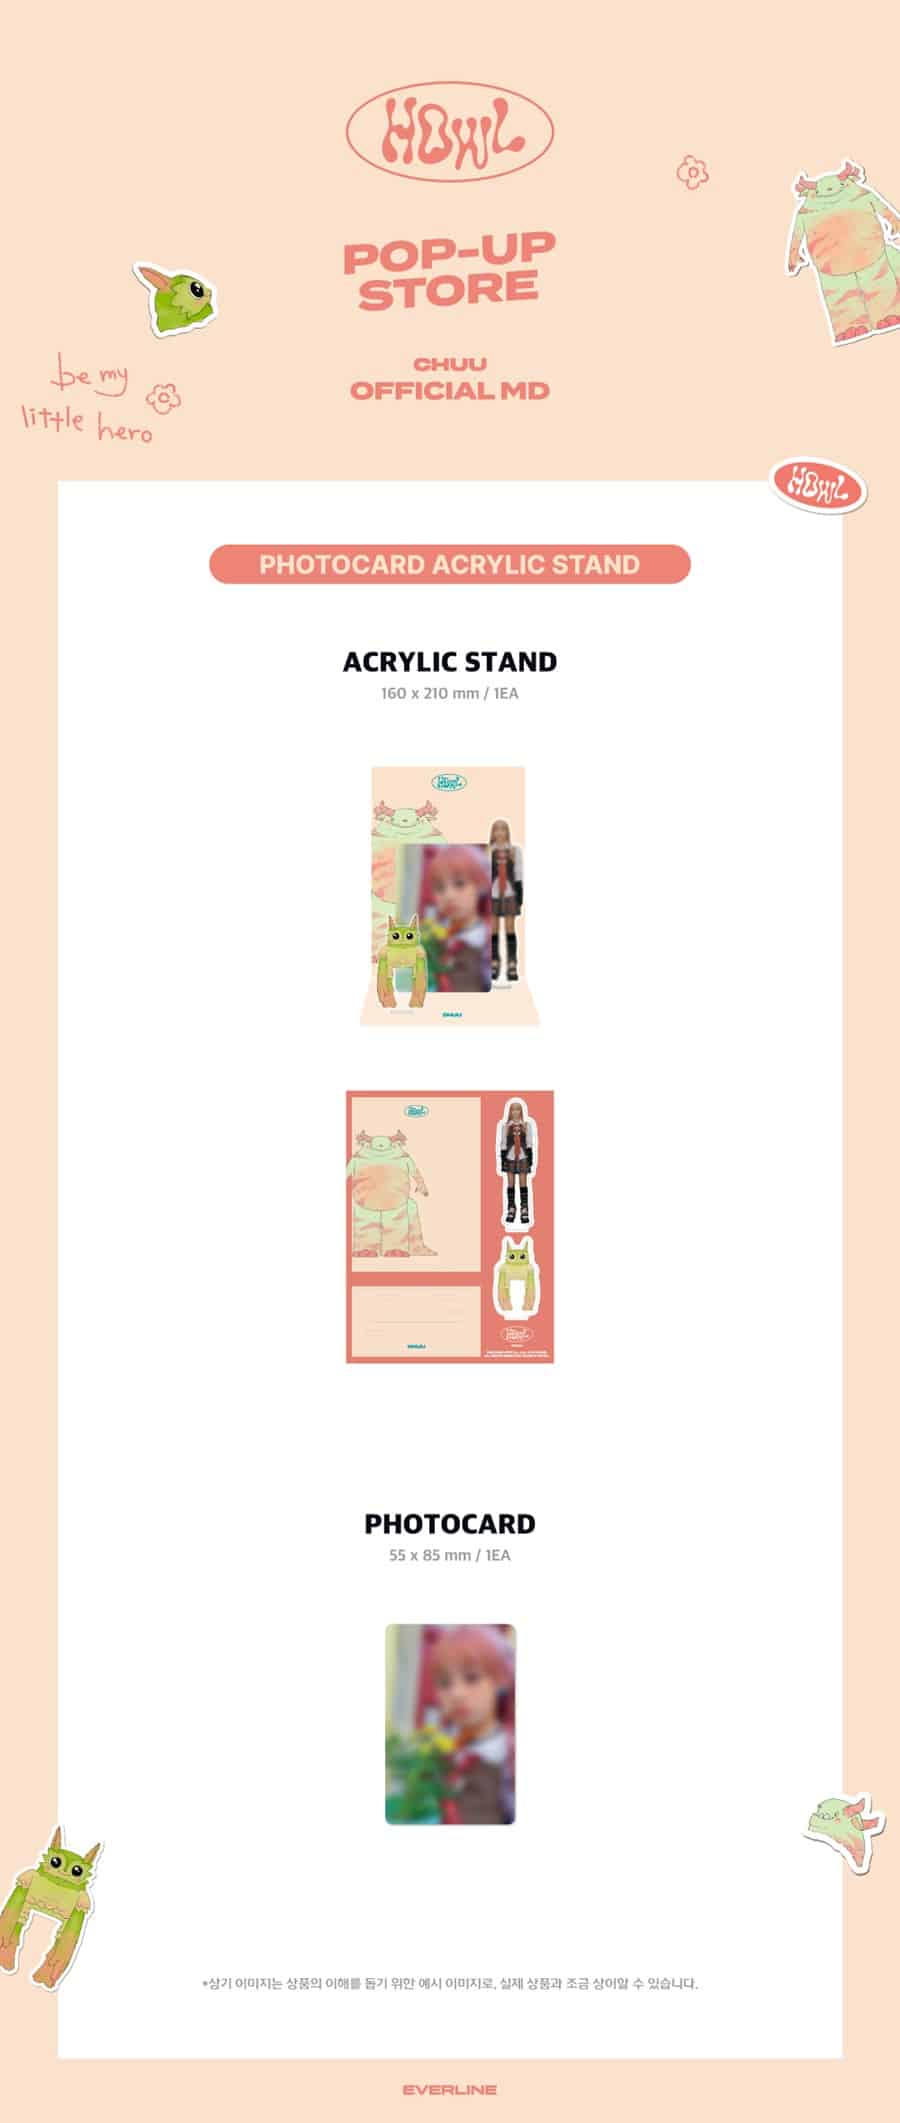 chuu-1st-mini-album-howl-official-md-photocard-acrylic-stand-wholesales